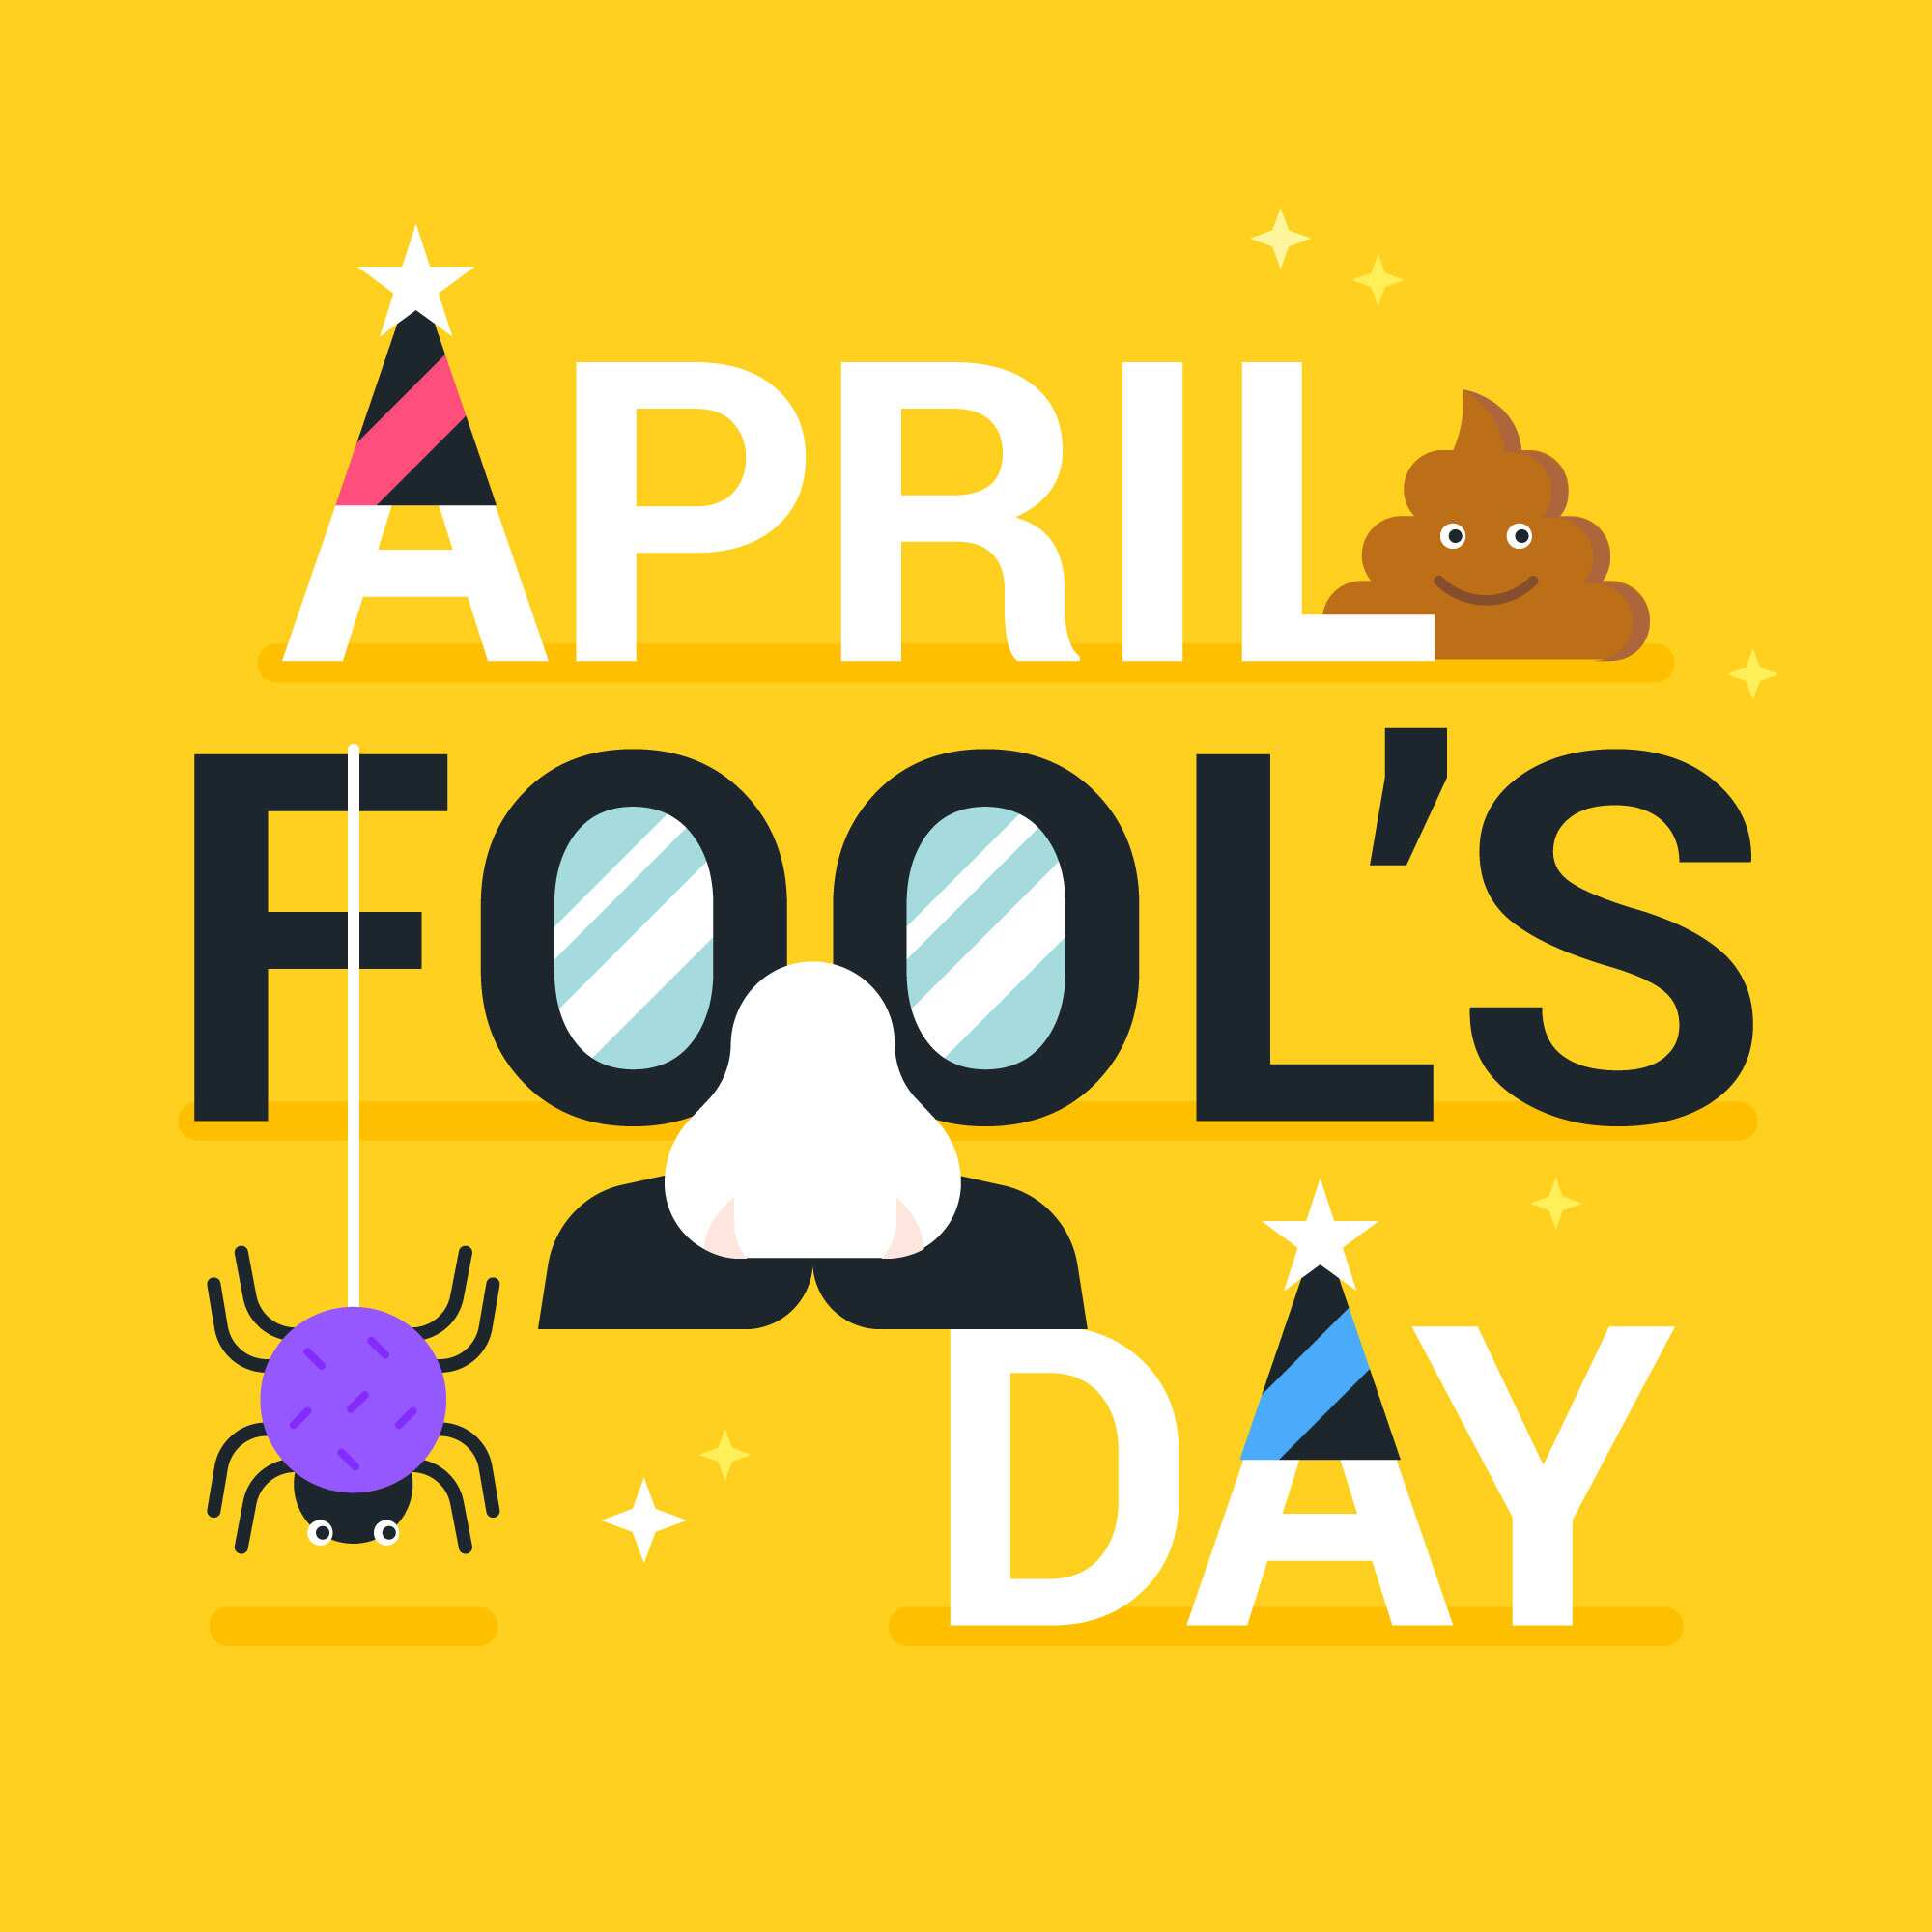 Happy April Fool's Day 2023 Wishes, WhatsApp messages, ideas, jokes